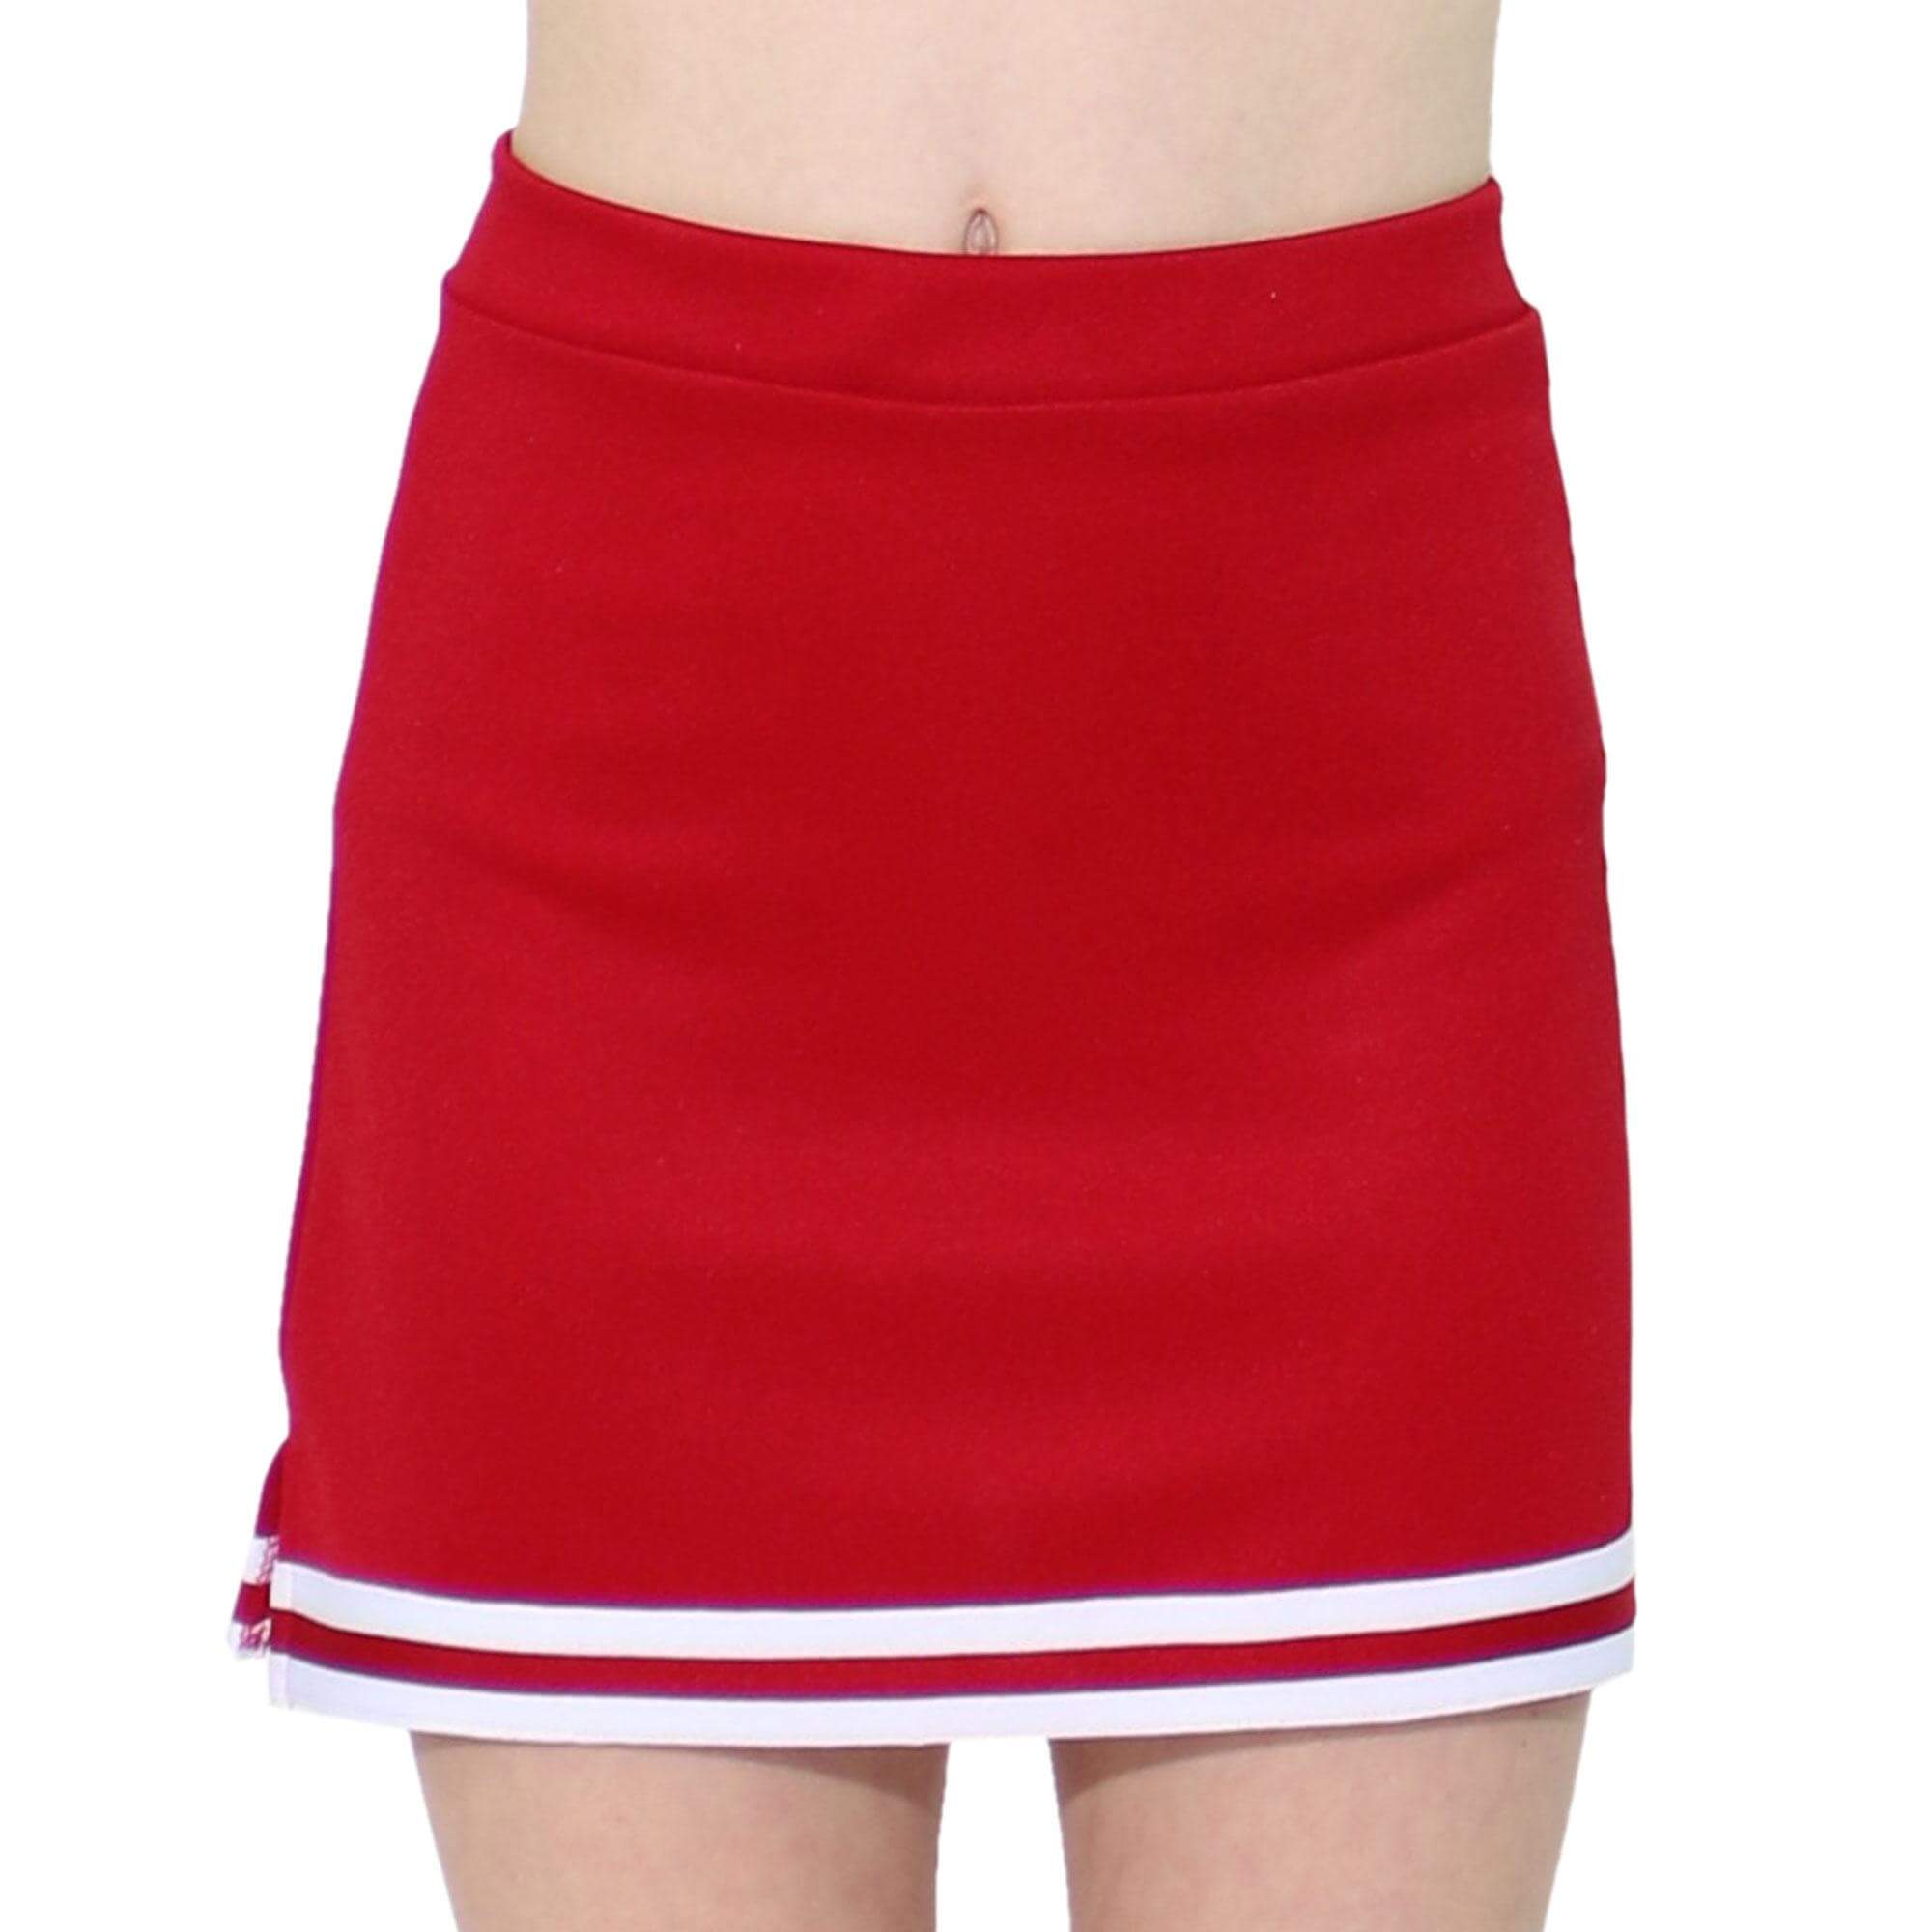 Danzcue Child A-Line Cheerleading Skirt - Click Image to Close